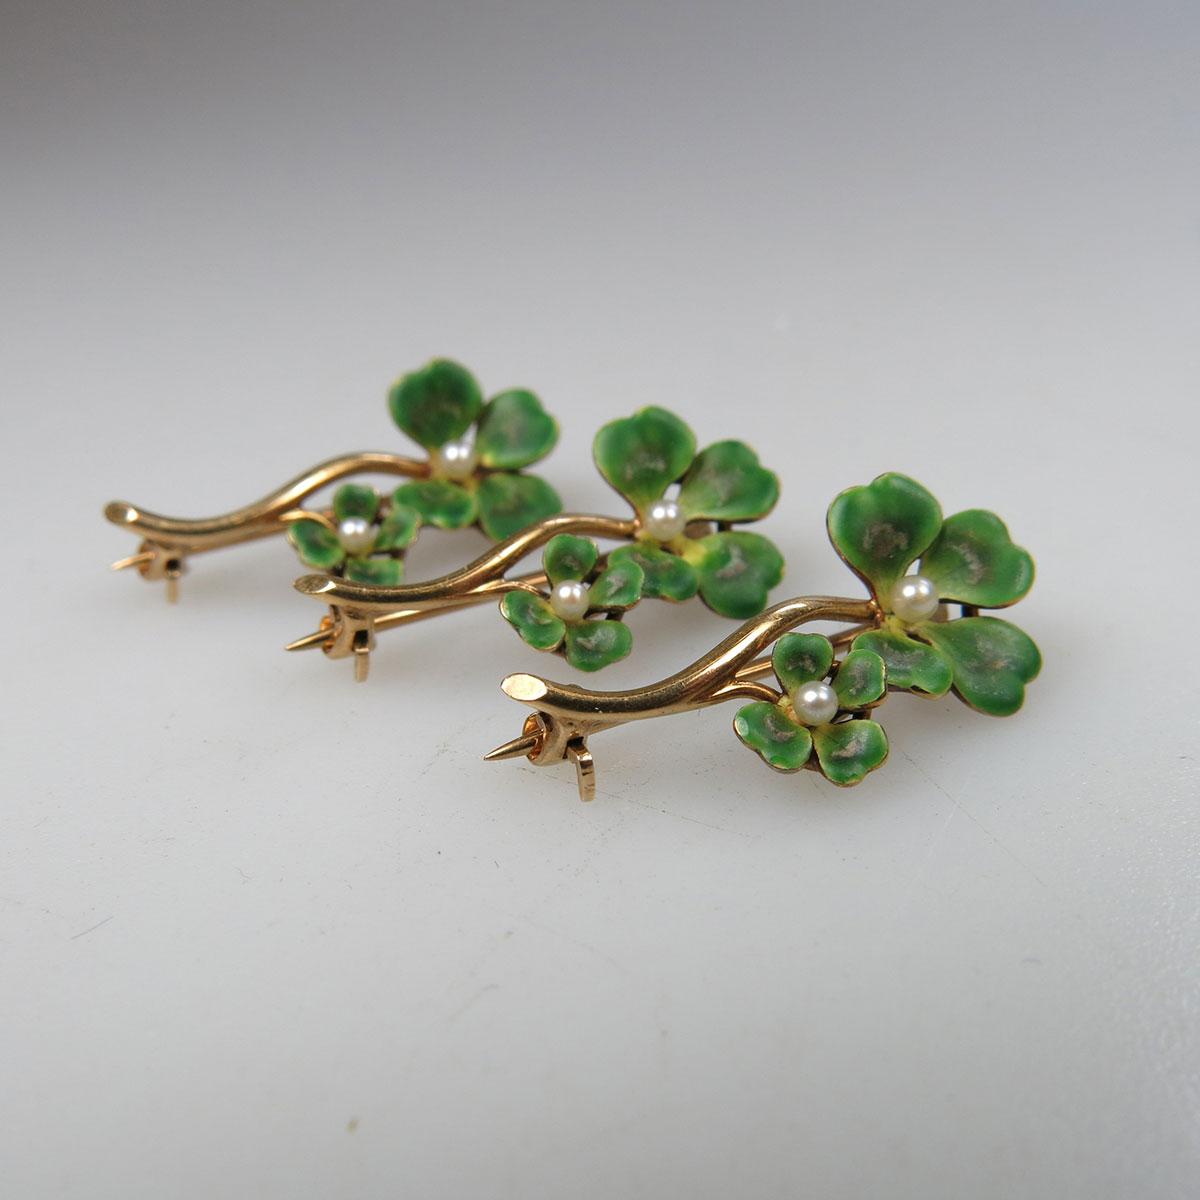 3 x 14k Yellow Gold Floral Pins